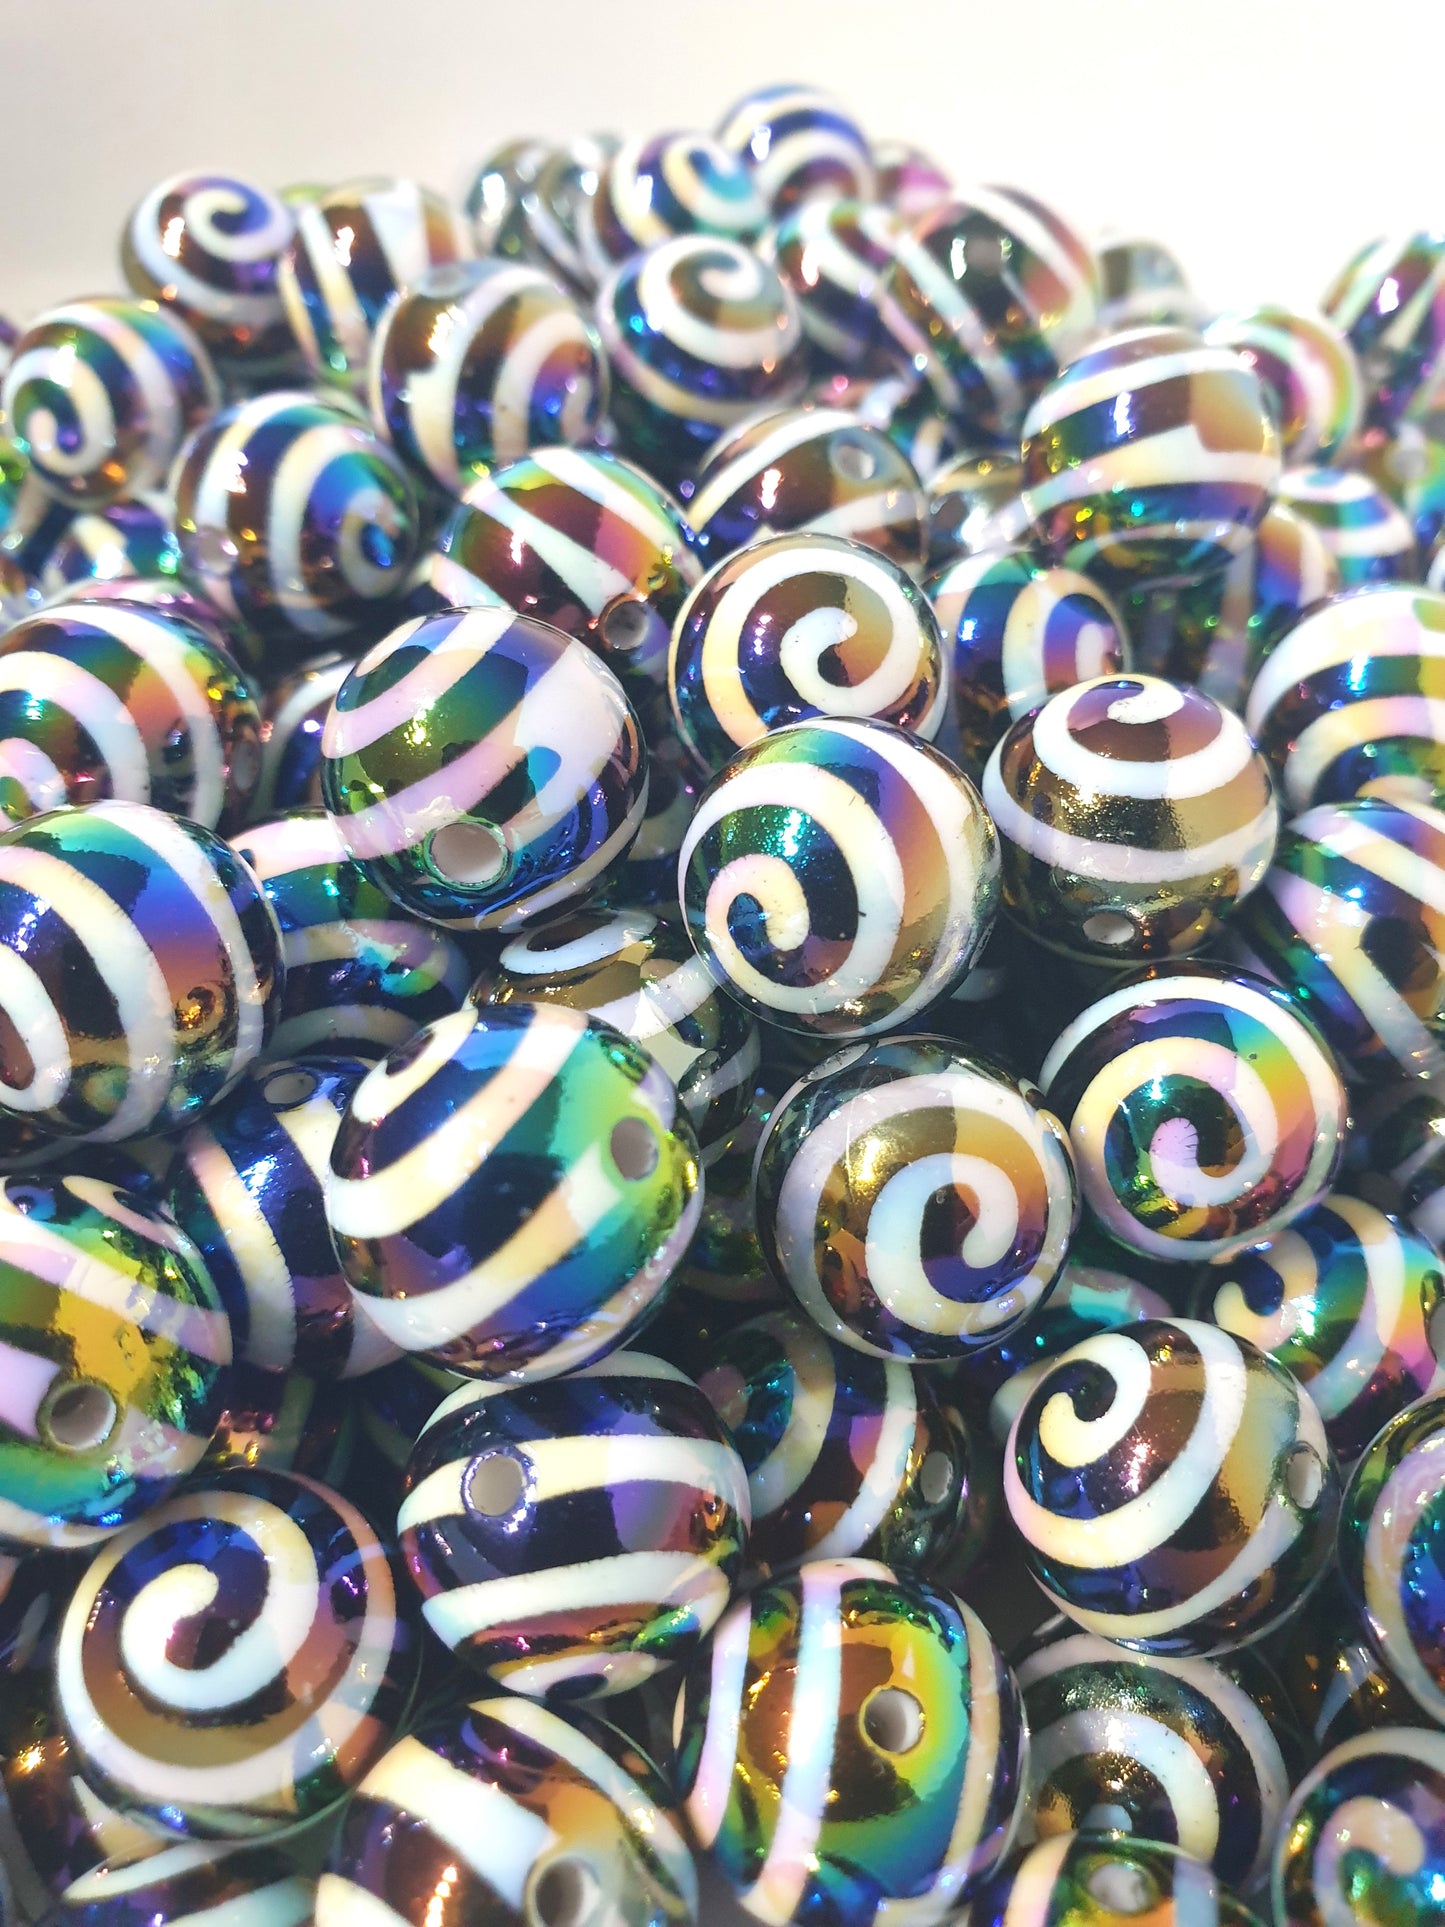 Round 16mm Black and White Swirl beads with UV rainbow finish. Ideal for jewellery and beadable blanks.